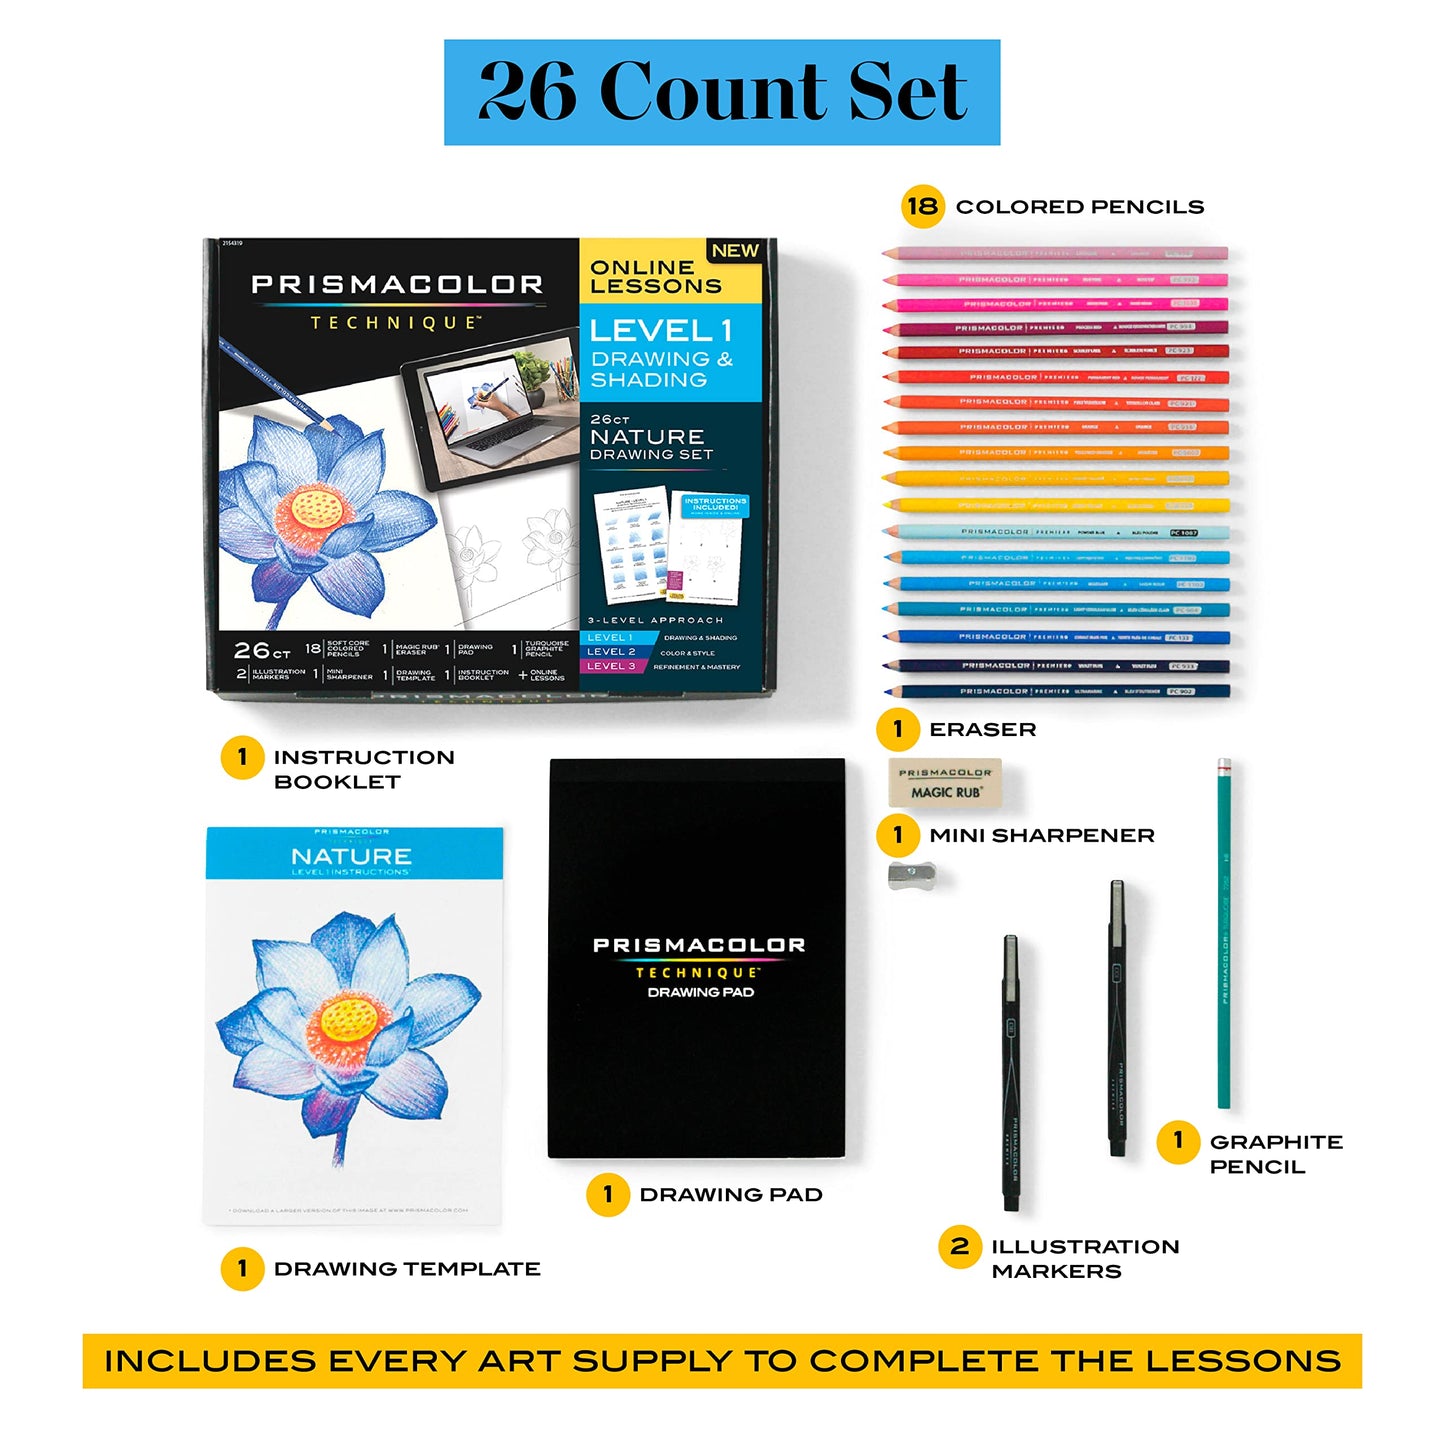 Prismacolor Technique, Art Supplies and Digital Art Lessons, Nature Drawing Set, Level 1, Learn to Draw with Colored Pencils, Graphite Pencils, and More, Flower Drawing, 26 Count